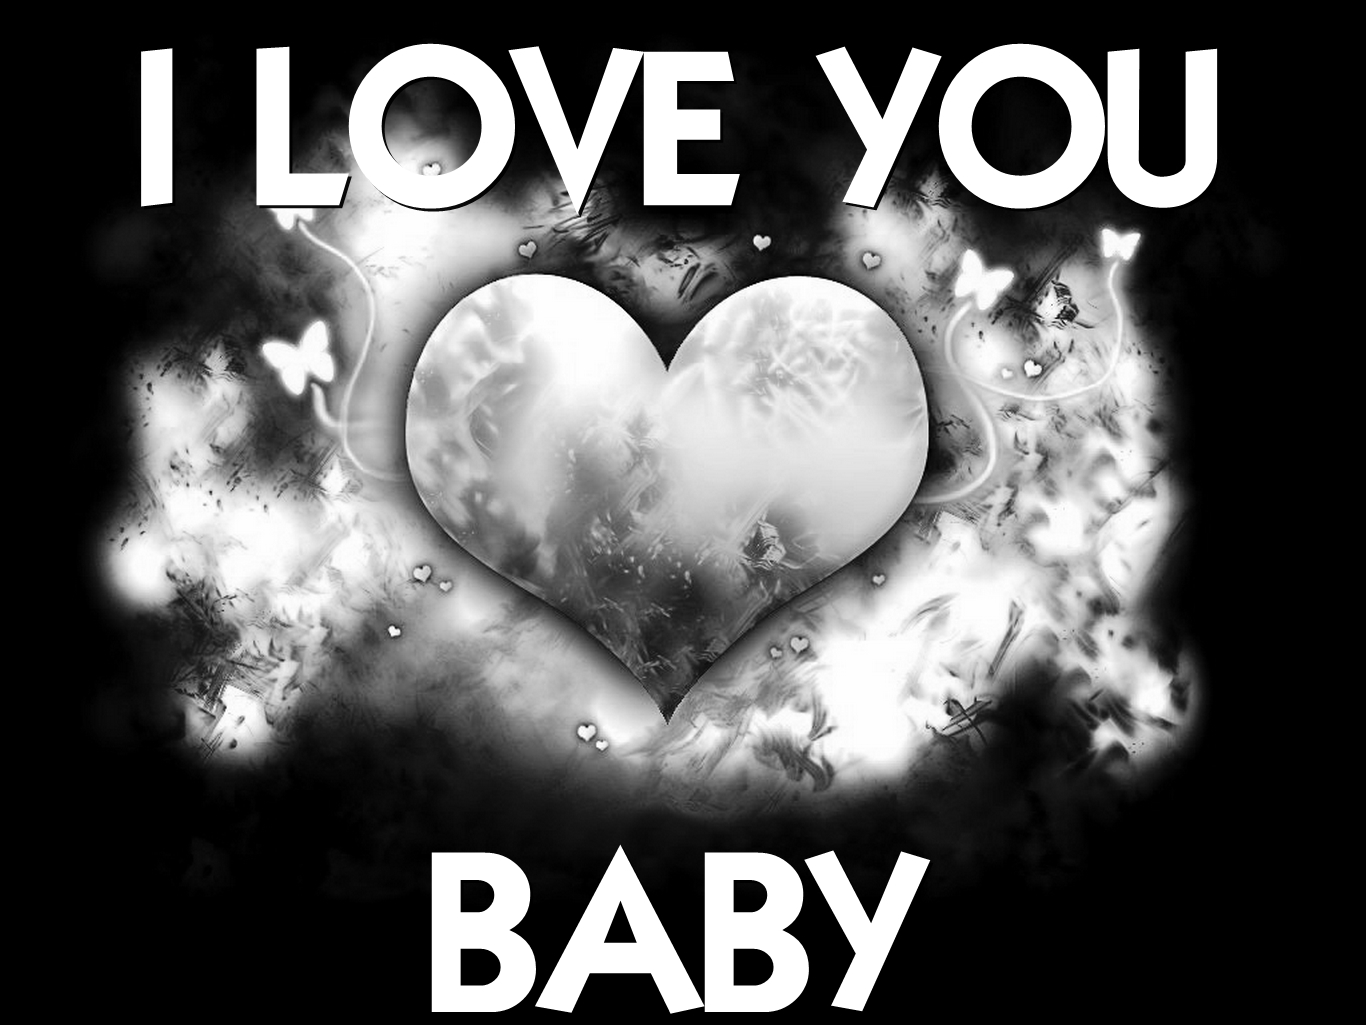 1I-love-you-baby-2015